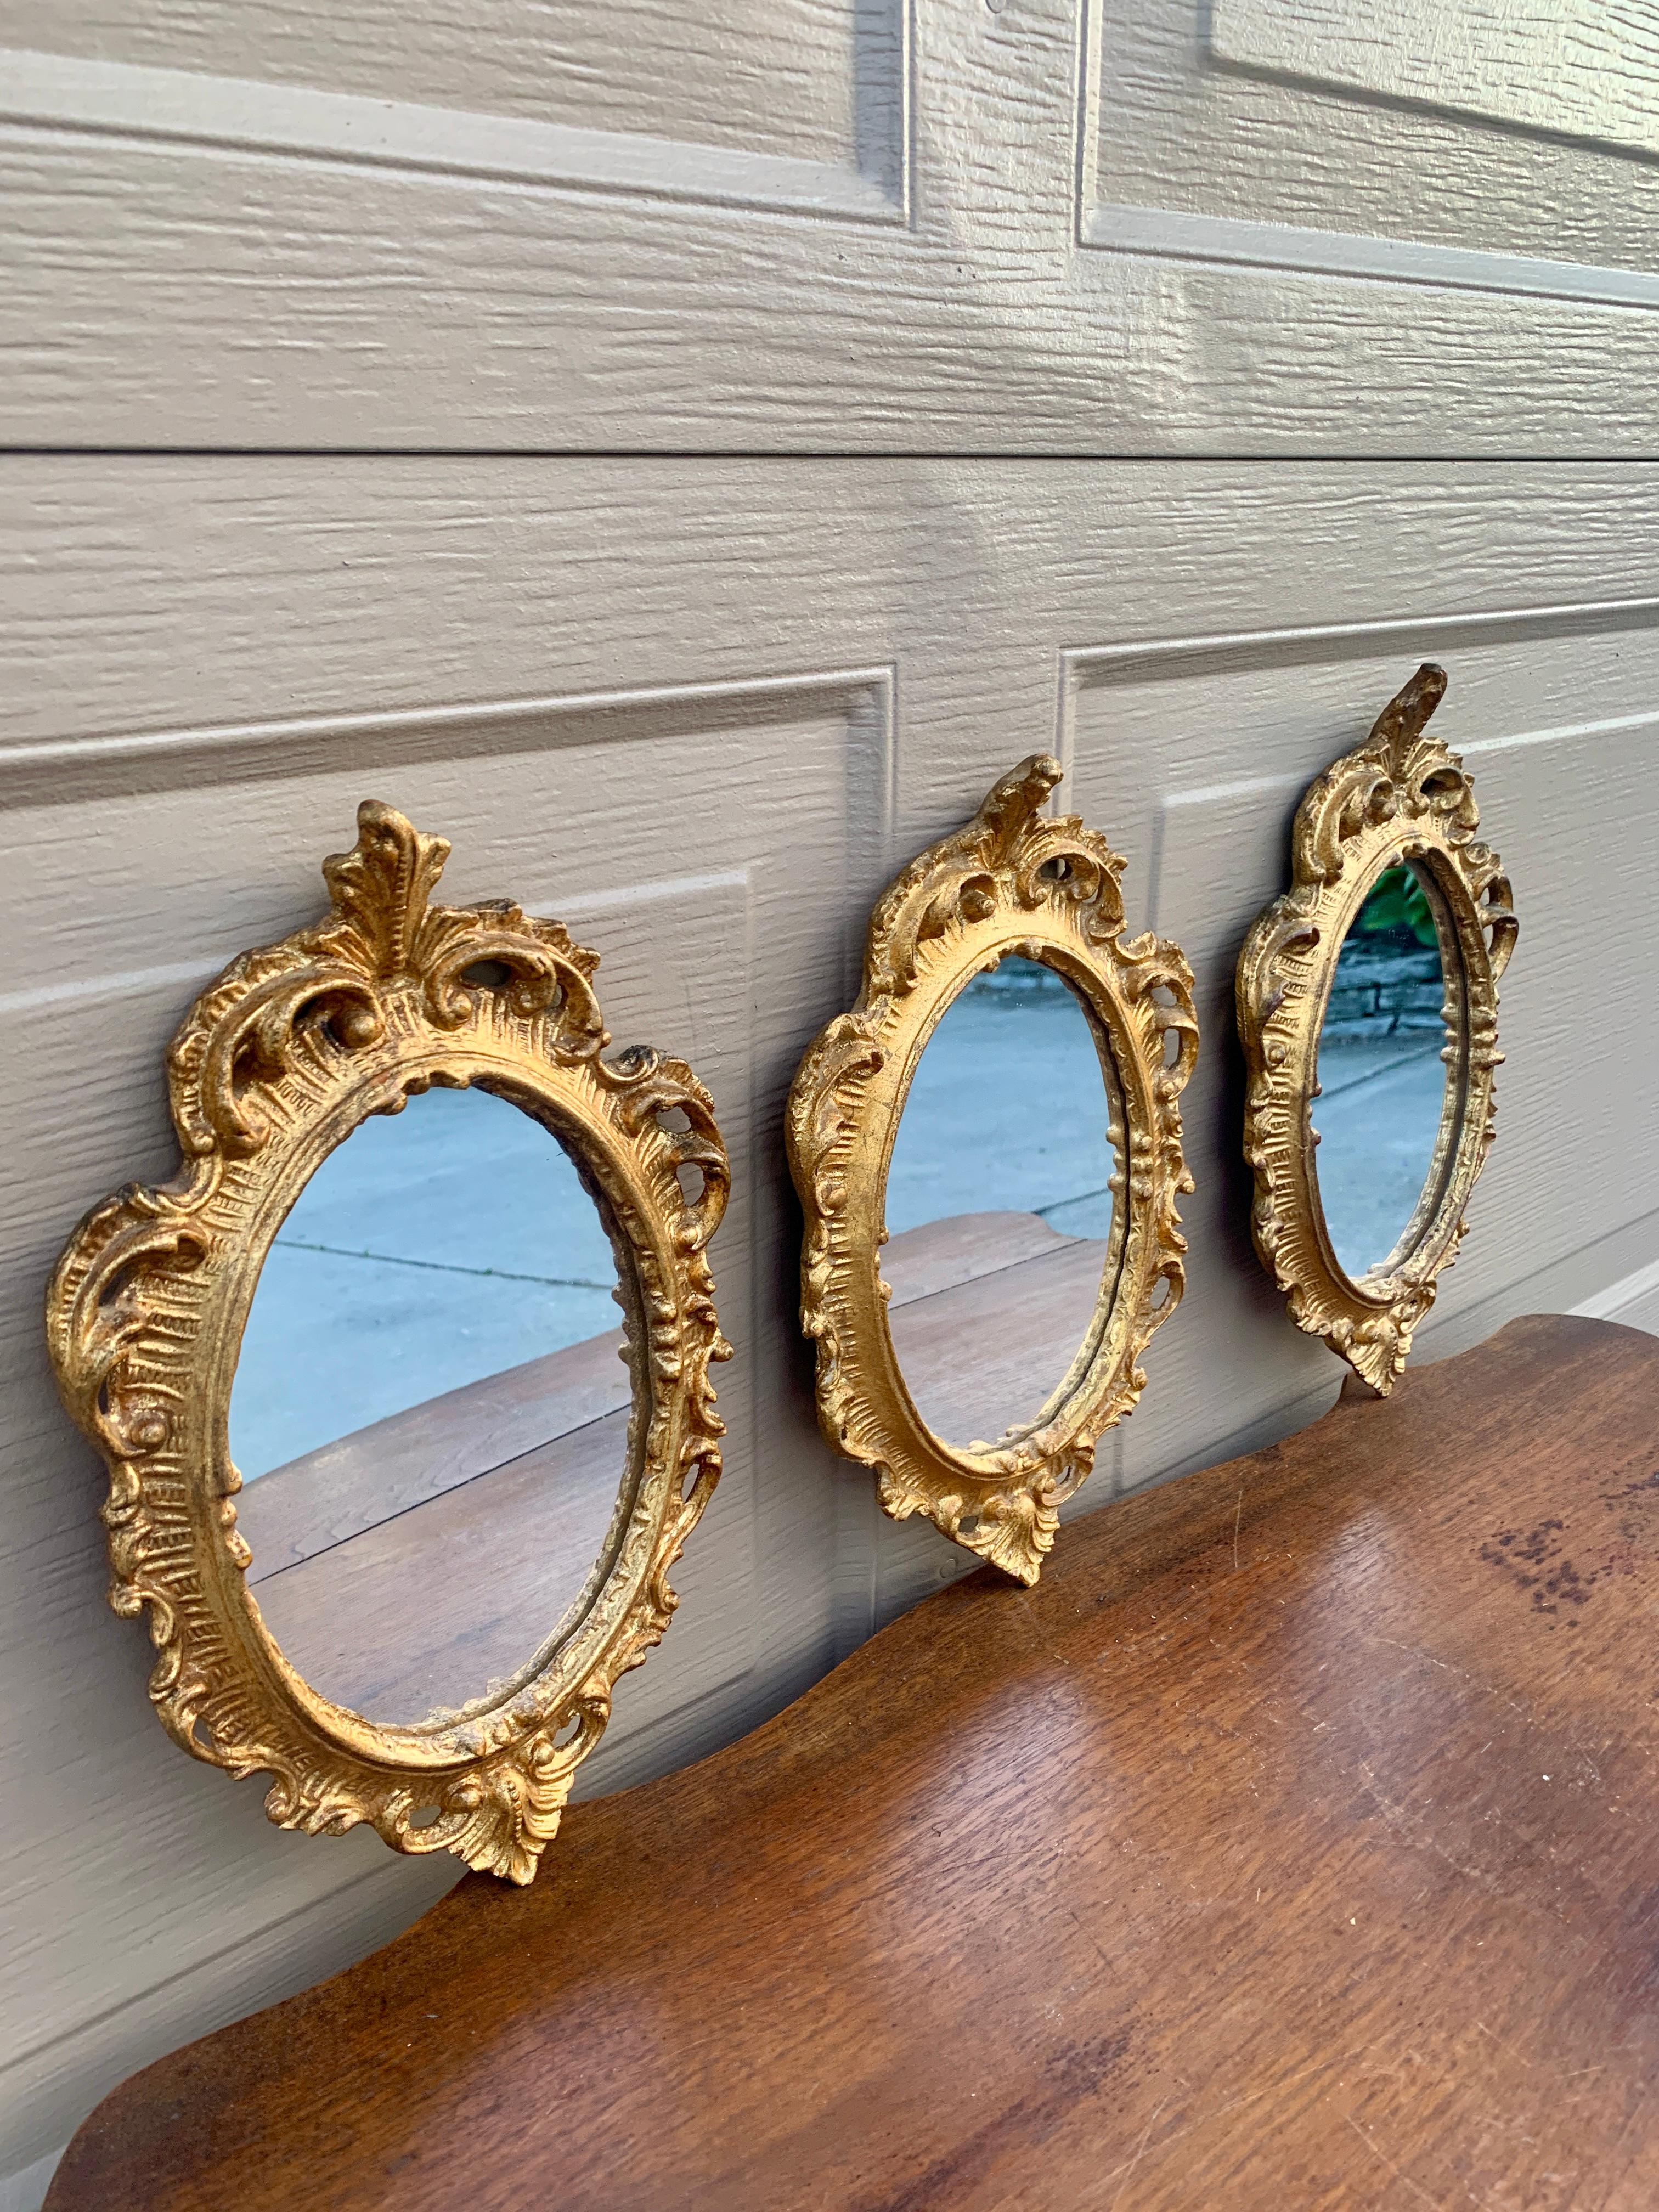 Italian Florentine Baroque Gold Giltwood Wall Mirrors, Set of Three In Good Condition For Sale In Elkhart, IN